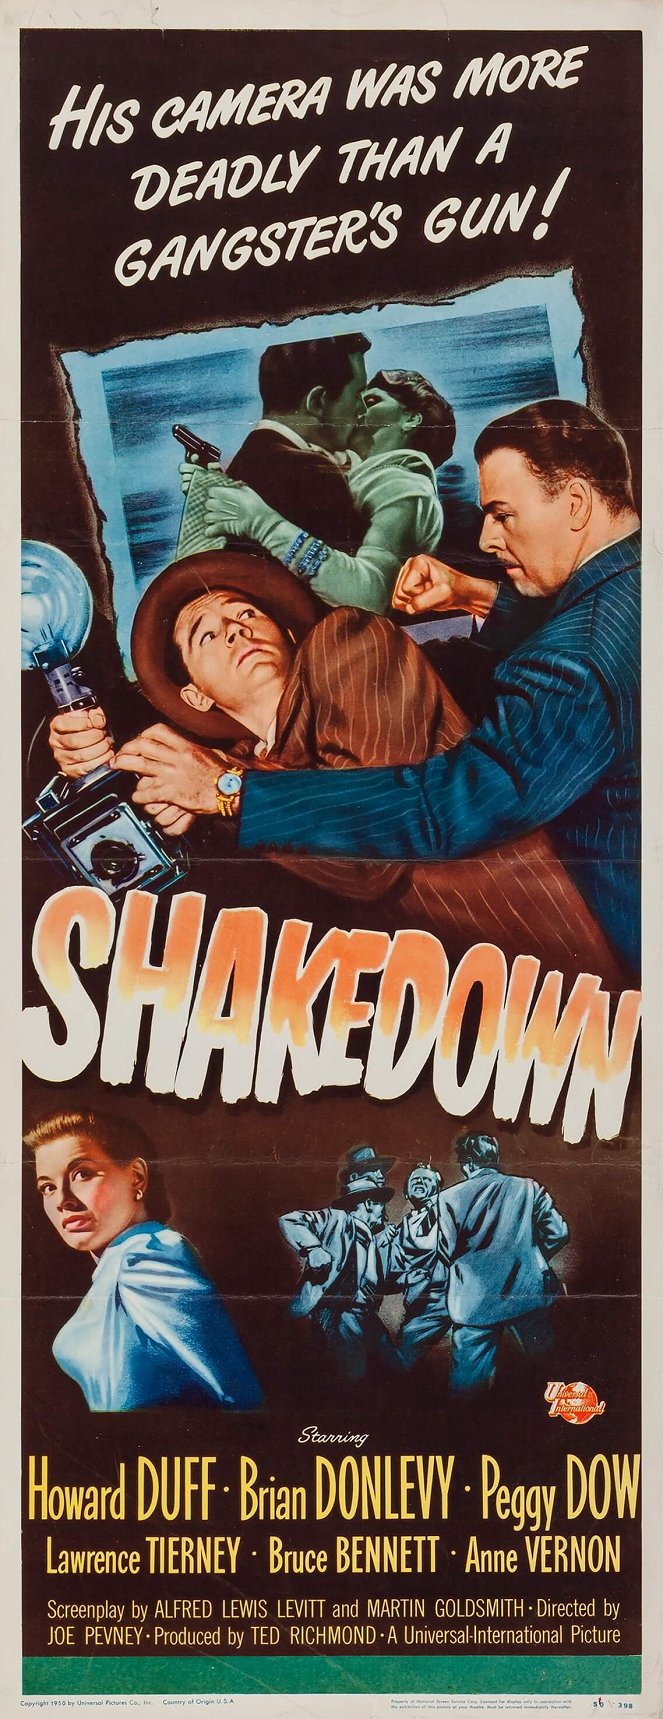 Shakedown - Affiches